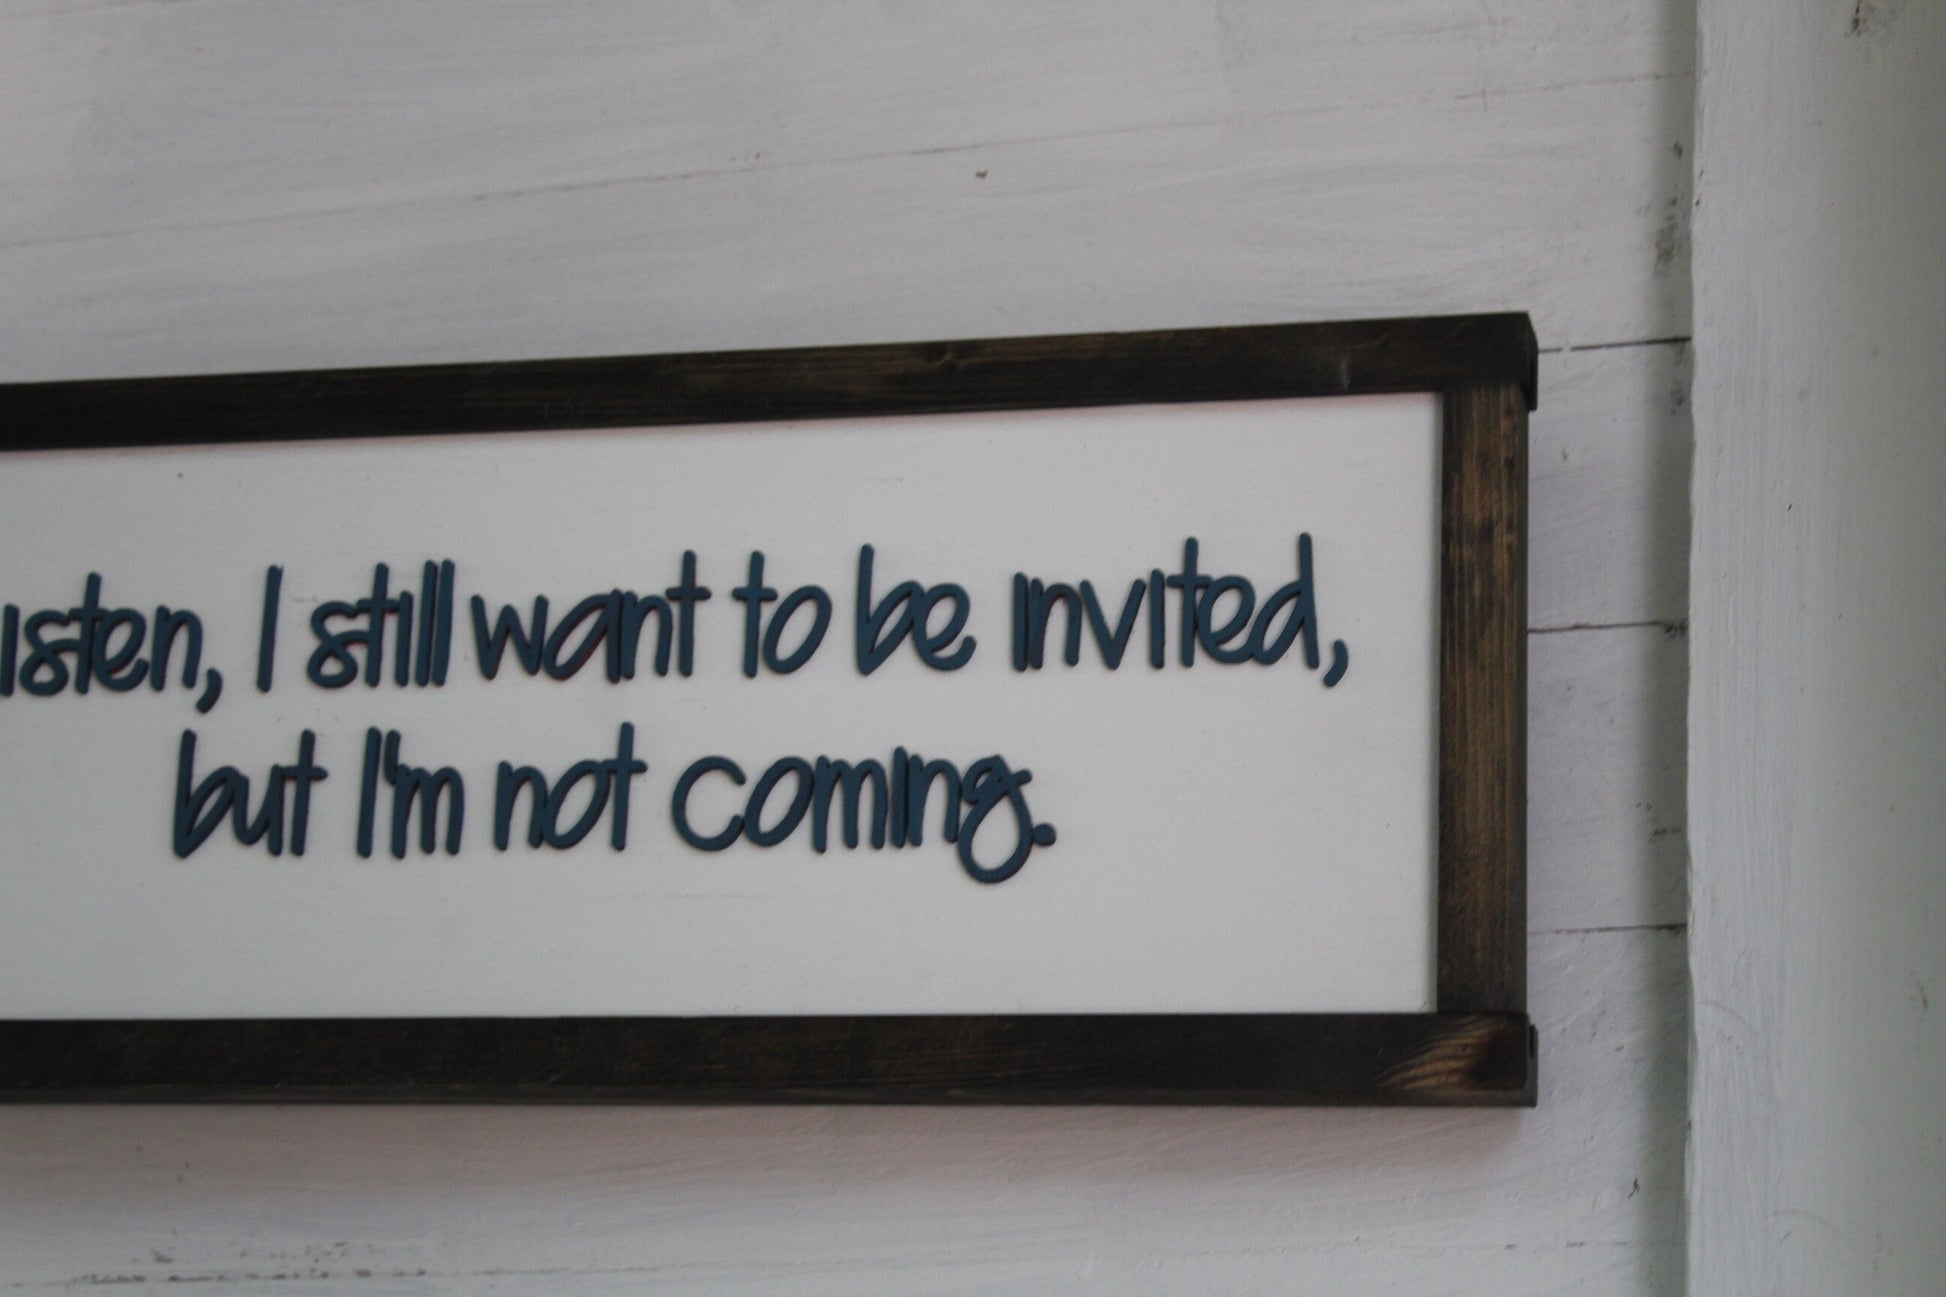 Introvert Wood Sign Joke Gag Gift Invite Me But I'm Not Coming Raised Text Rustic Sarcastic Decoration Wall Decor Hanging Snarky Homebody